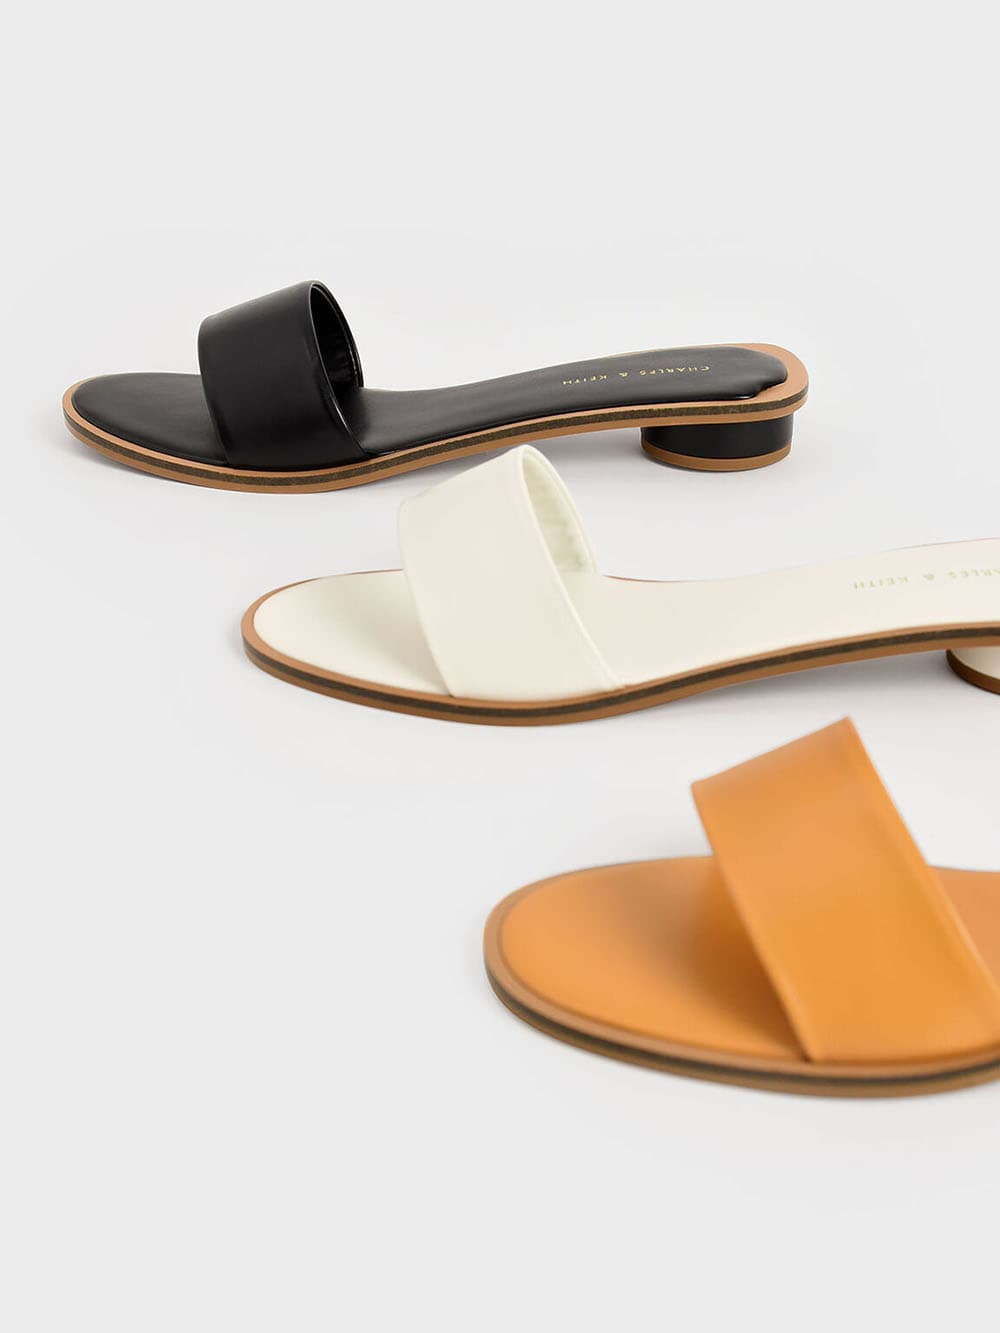 CHARLES & KEITH SG | Shop Women's Shoes, Bags & Accessories Online